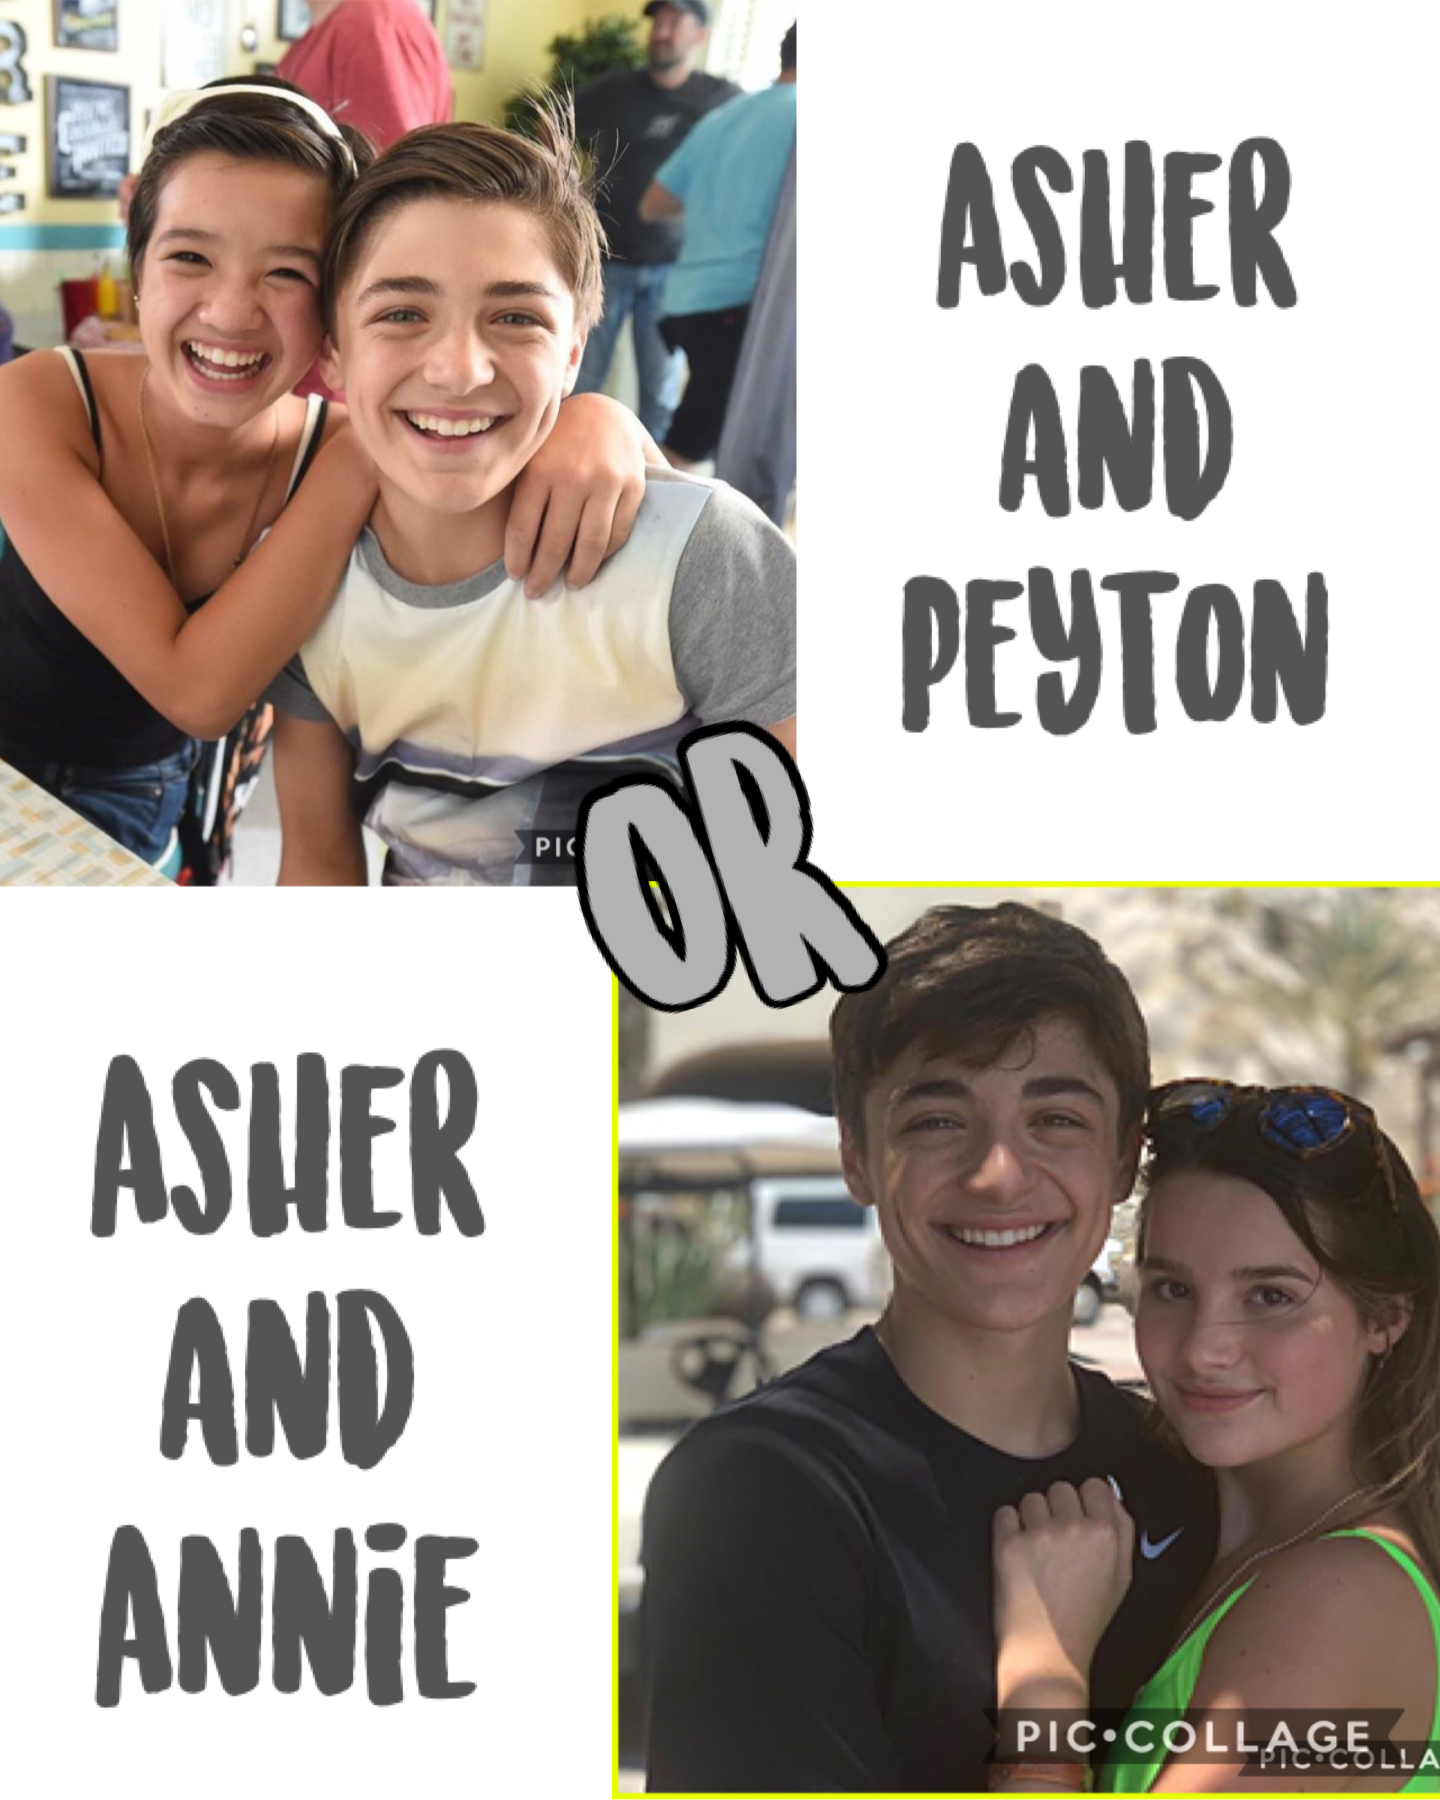 ASHER AND ANNIE DUHHHHH
they win the cutest couple award by farrr🤩🤩🤩😍😍😍☺️🖤🖤🖤🖤🖤
I haven’t done a poll in so long!!! I hope y’all will comment and tell me your answer! I love seeing y’alls answers 🥰🖤